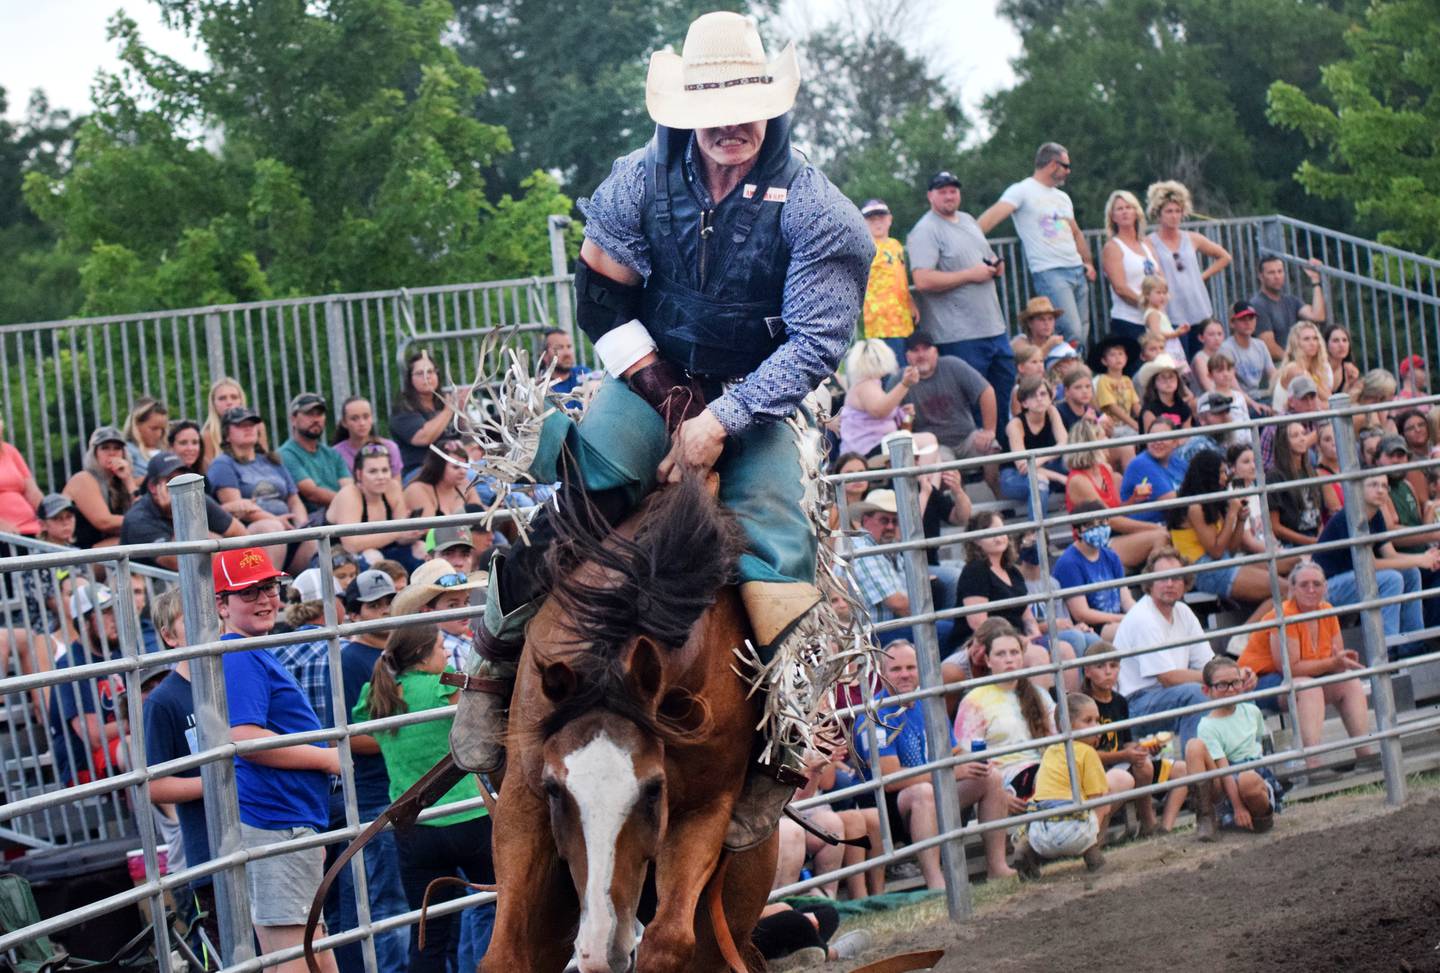 Bucking broncos, barrel racing, bull riding and mutton busting were some of the many attractions at the Jasper County Fair Rodeo and Ty Carlson Memorial Bull Ride on July 15.